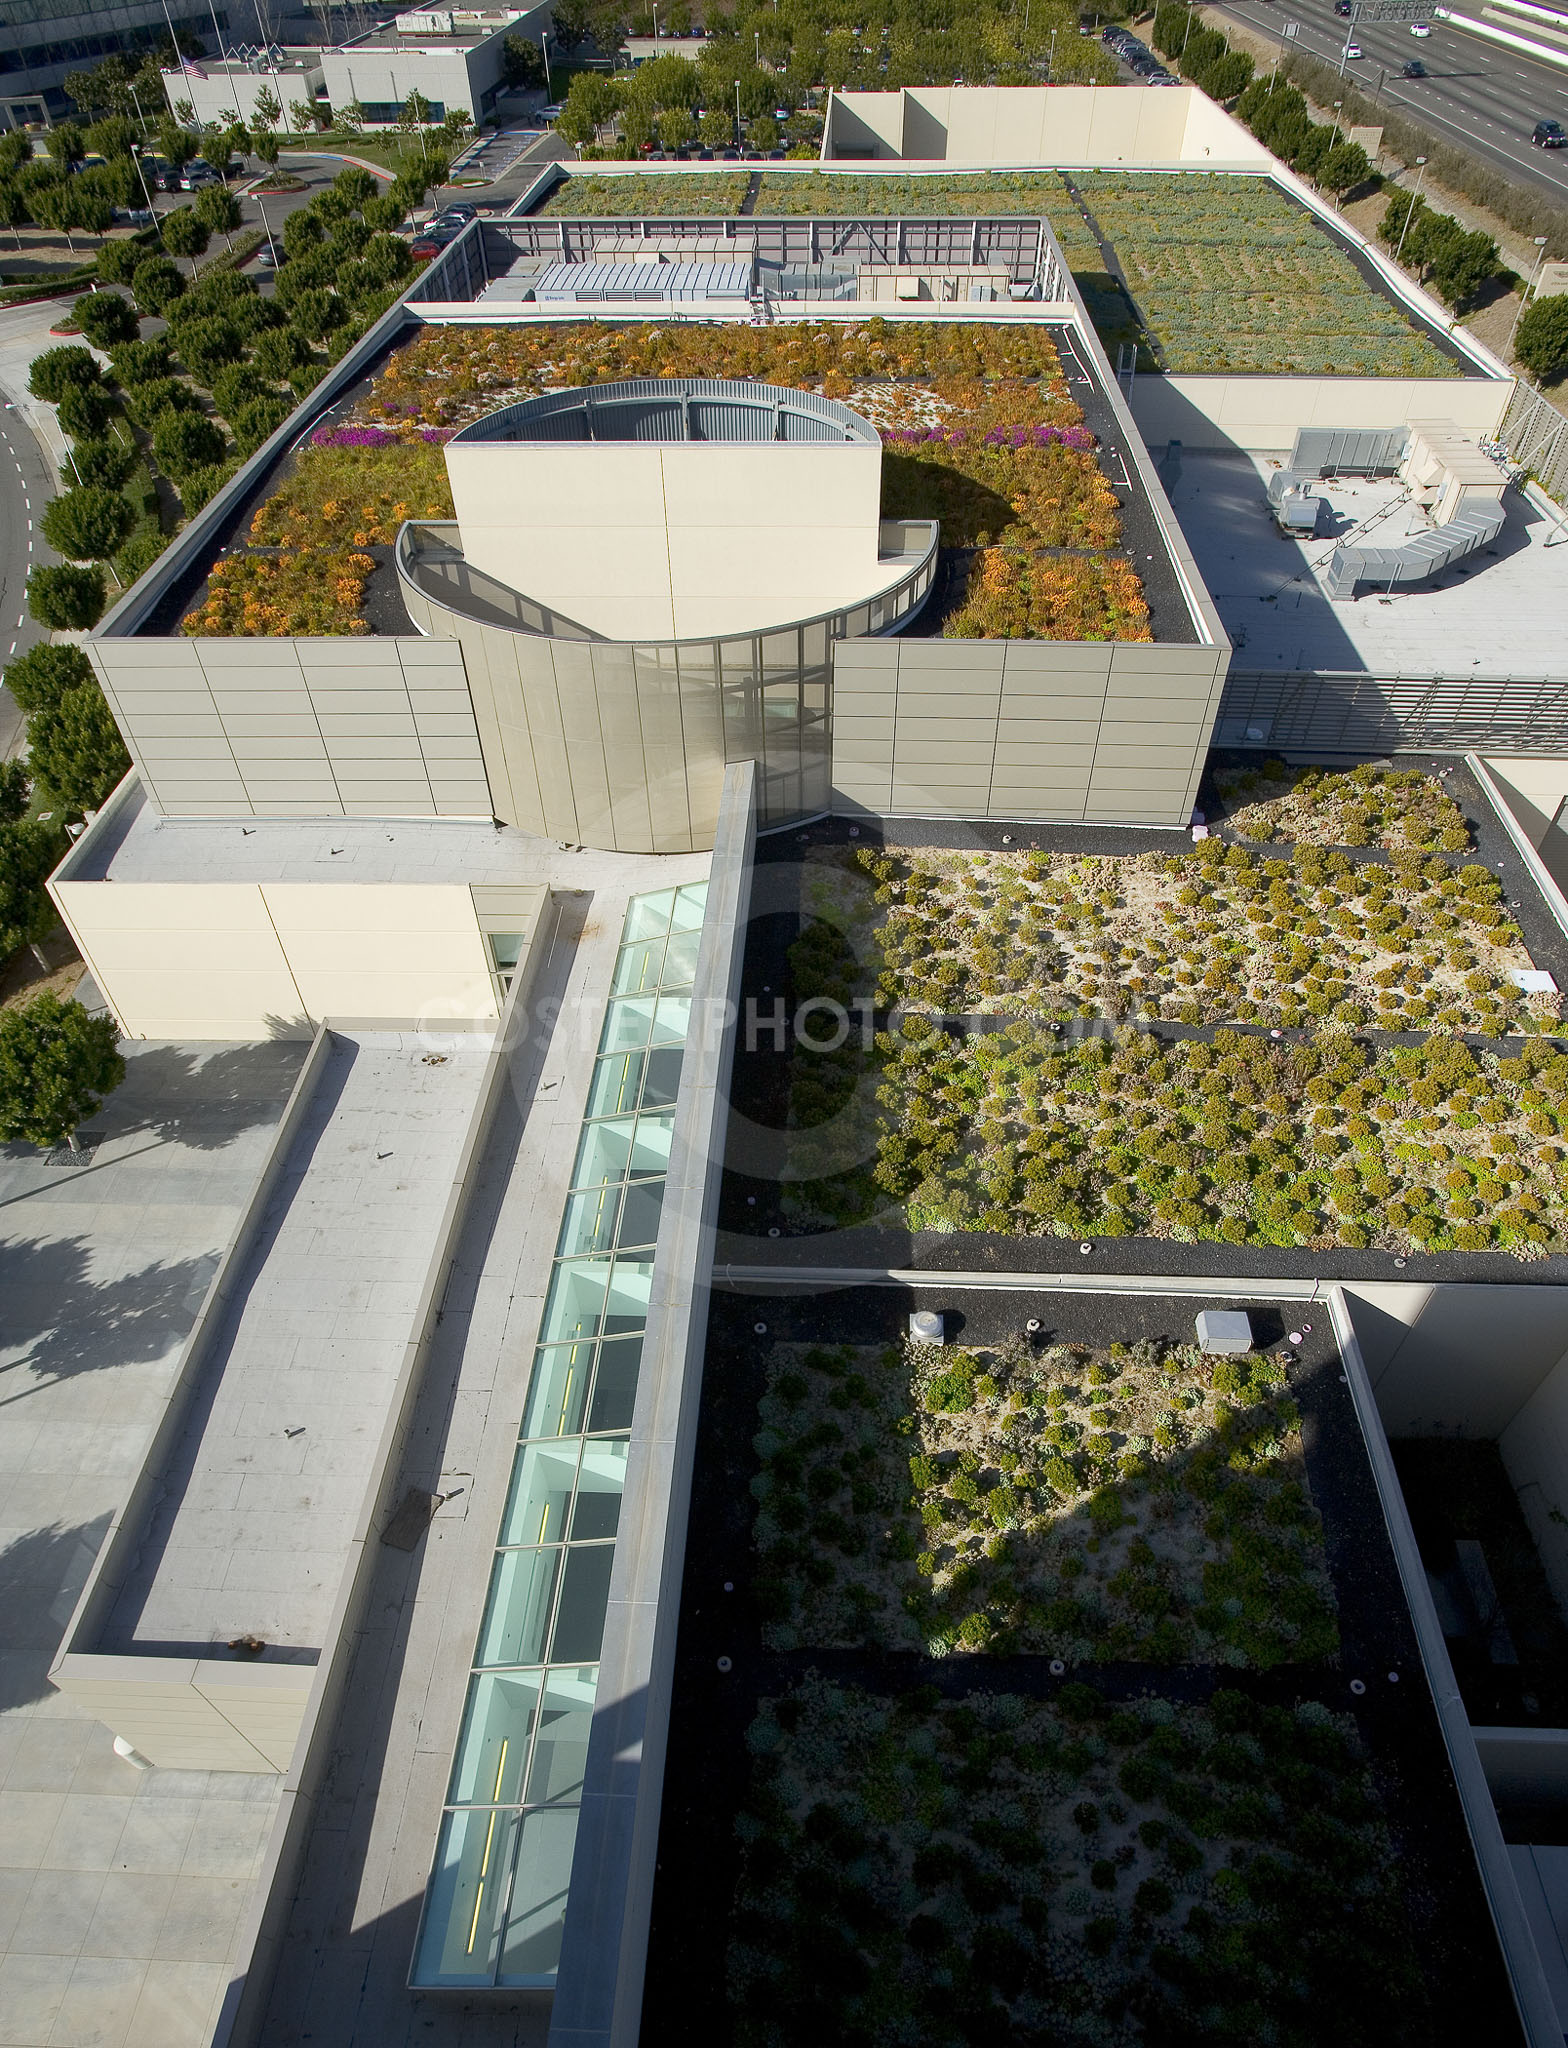 PAG Green Roof 006